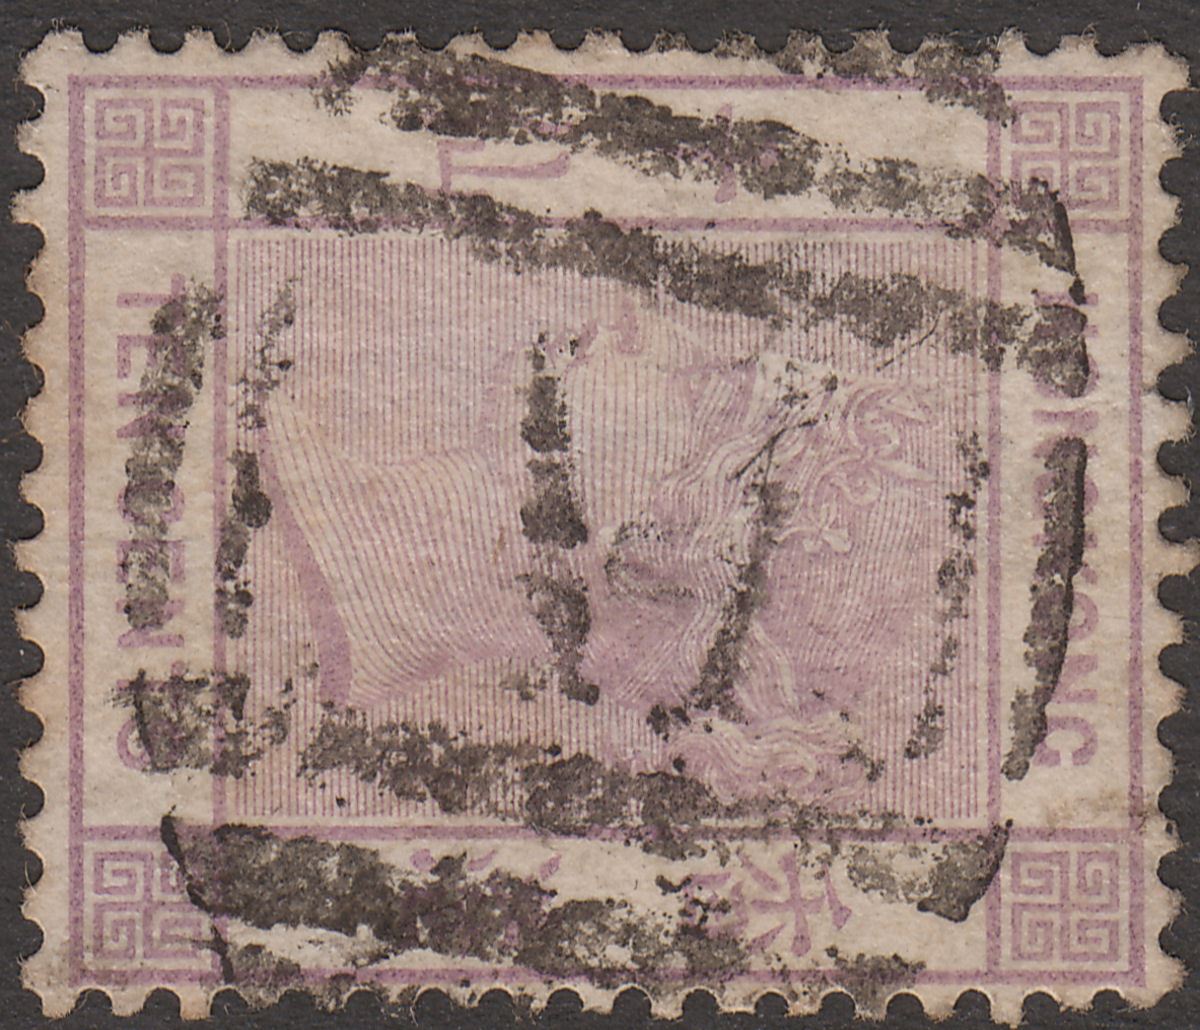 Hong Kong 1880 QV 10c Mauve used AMOY with A1 Postmark SG Z30 cat £75 PO China